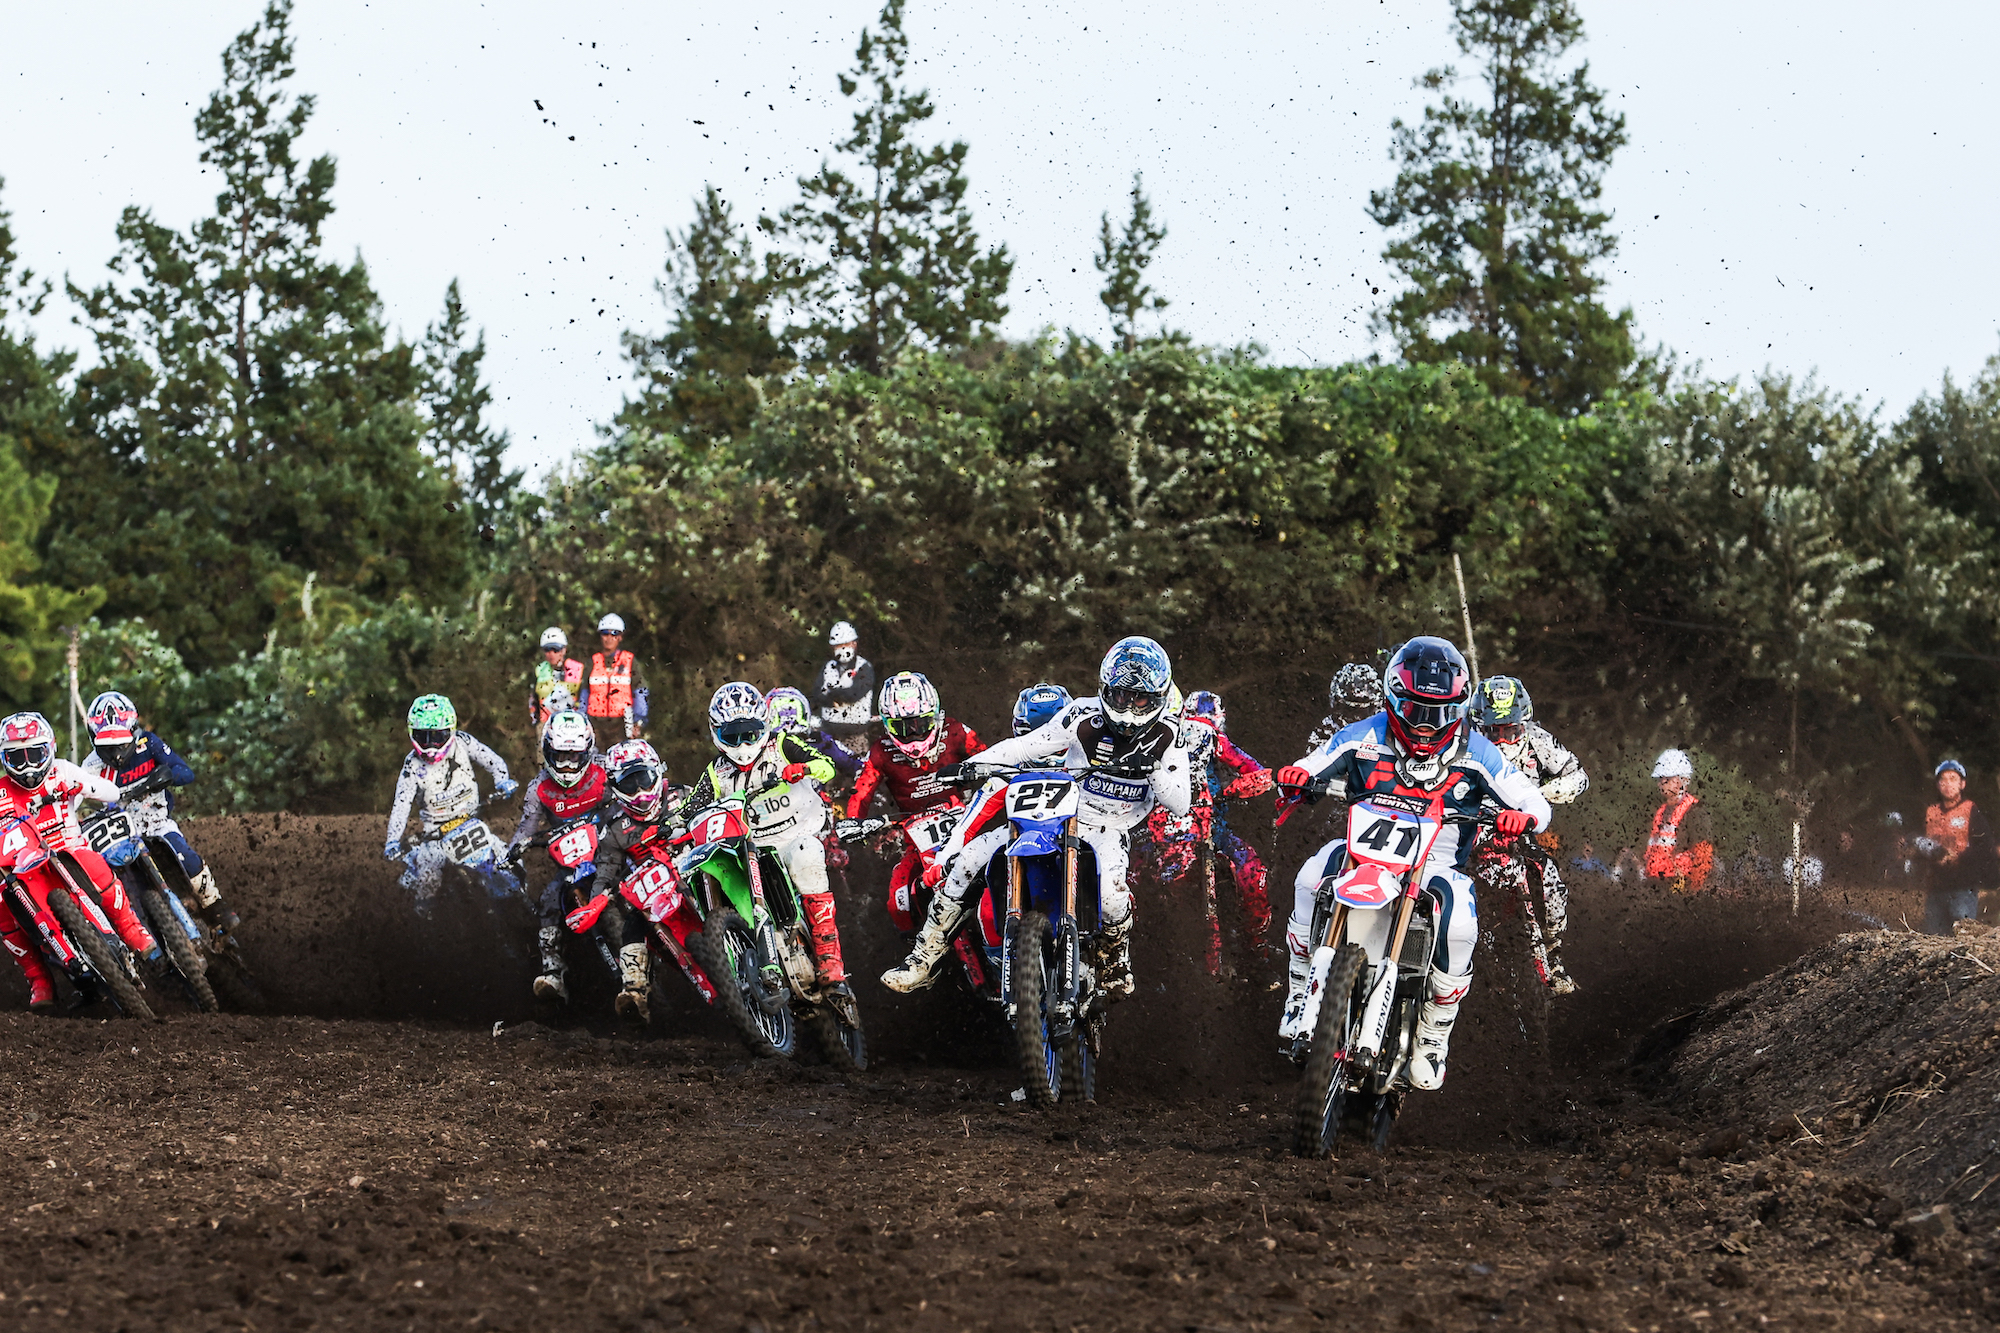 A view of Honda's electric motocross prototype at the All Japan Motocross Championship. Media provided by Honda.